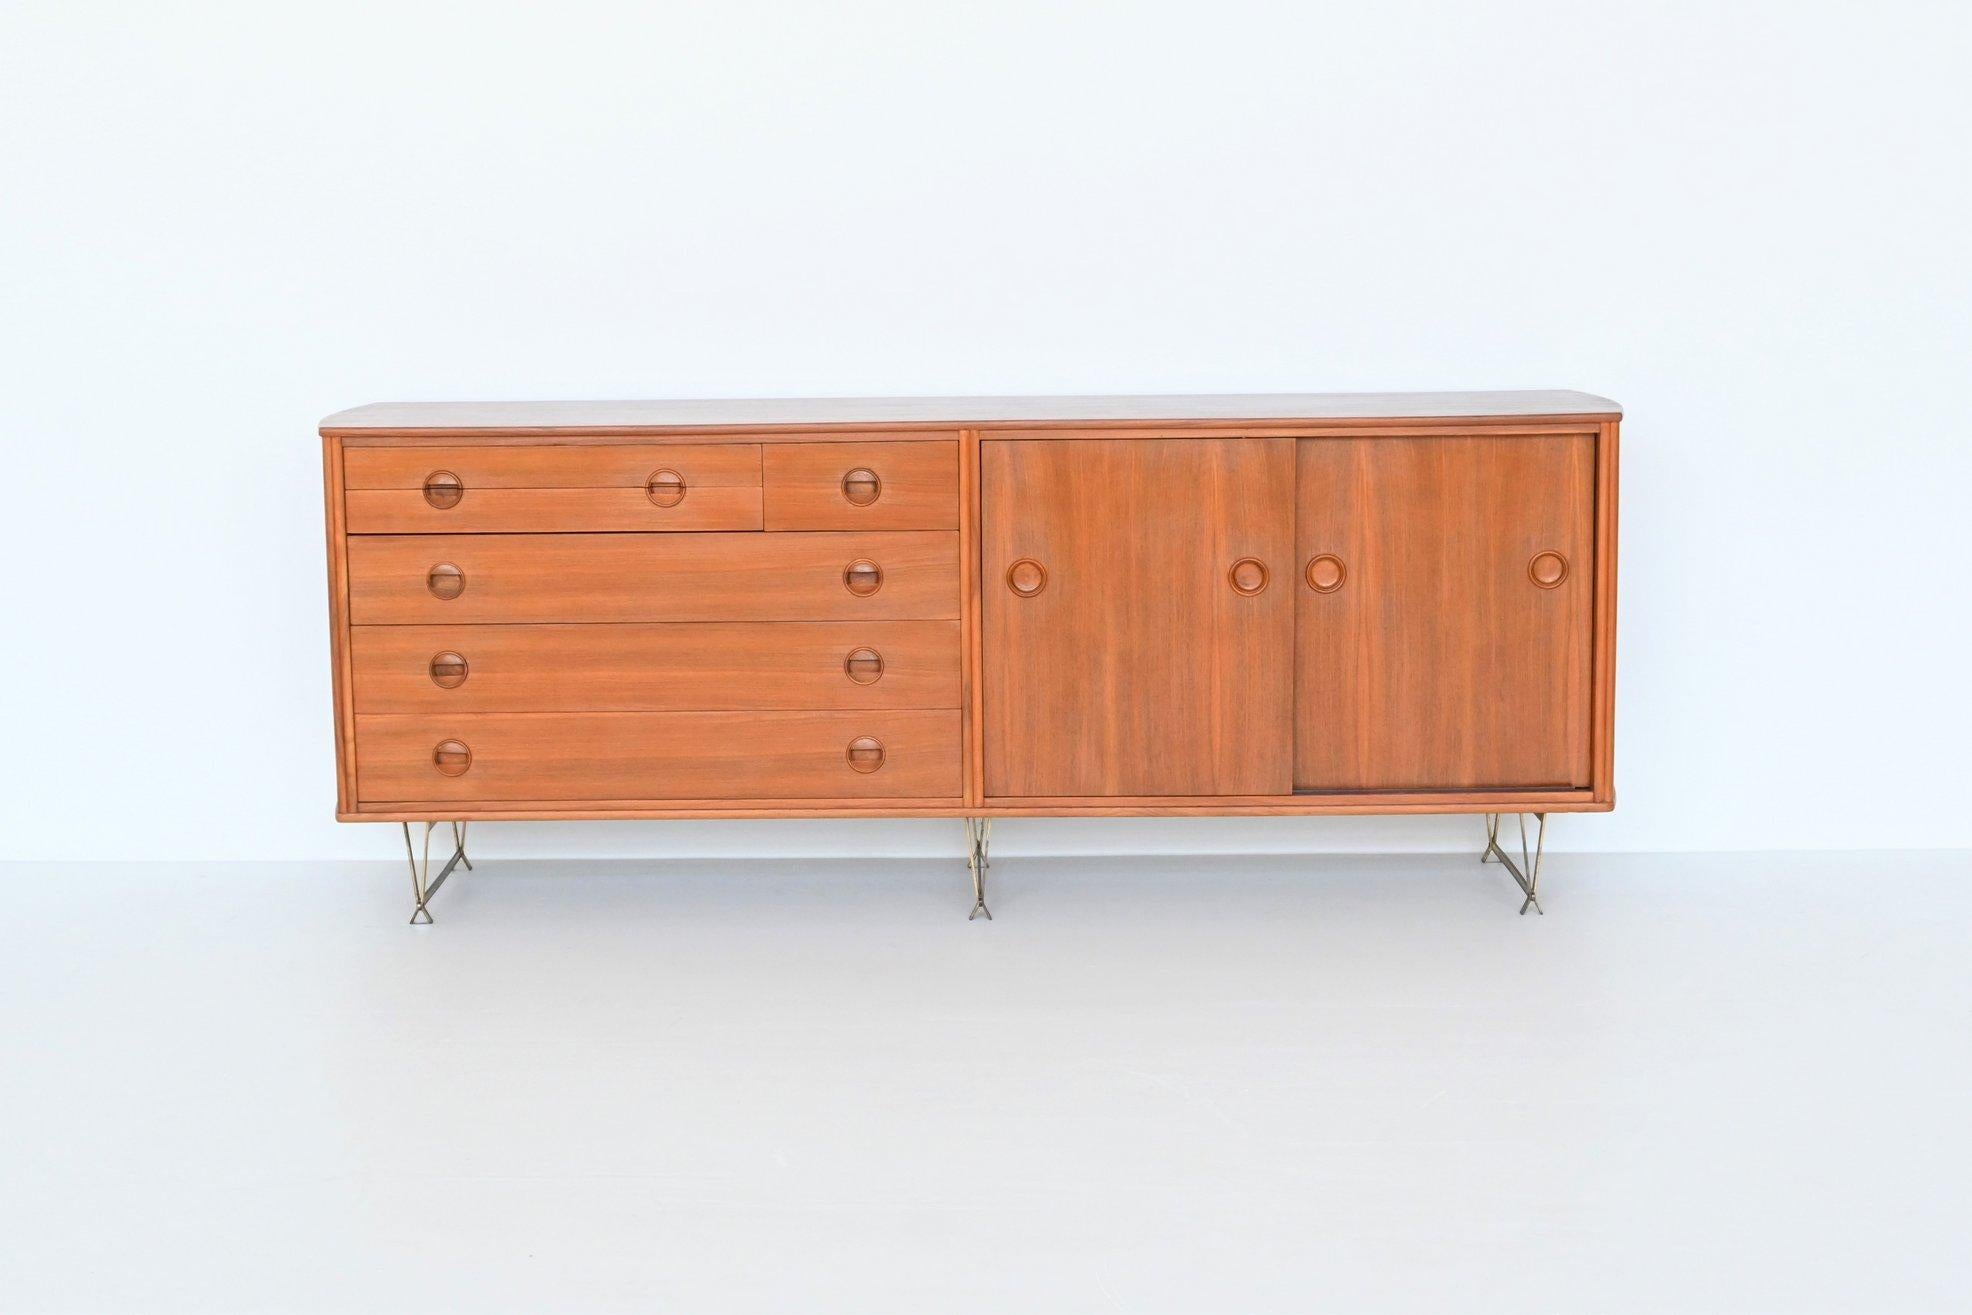 Stunning and rare sideboard designed by William Watting and manufactured by Fristho, The Netherlands 1954. This very nice shaped sideboard is made of veneered walnut wood with brass legs. On the right it has two sliding doors with shelves behind and